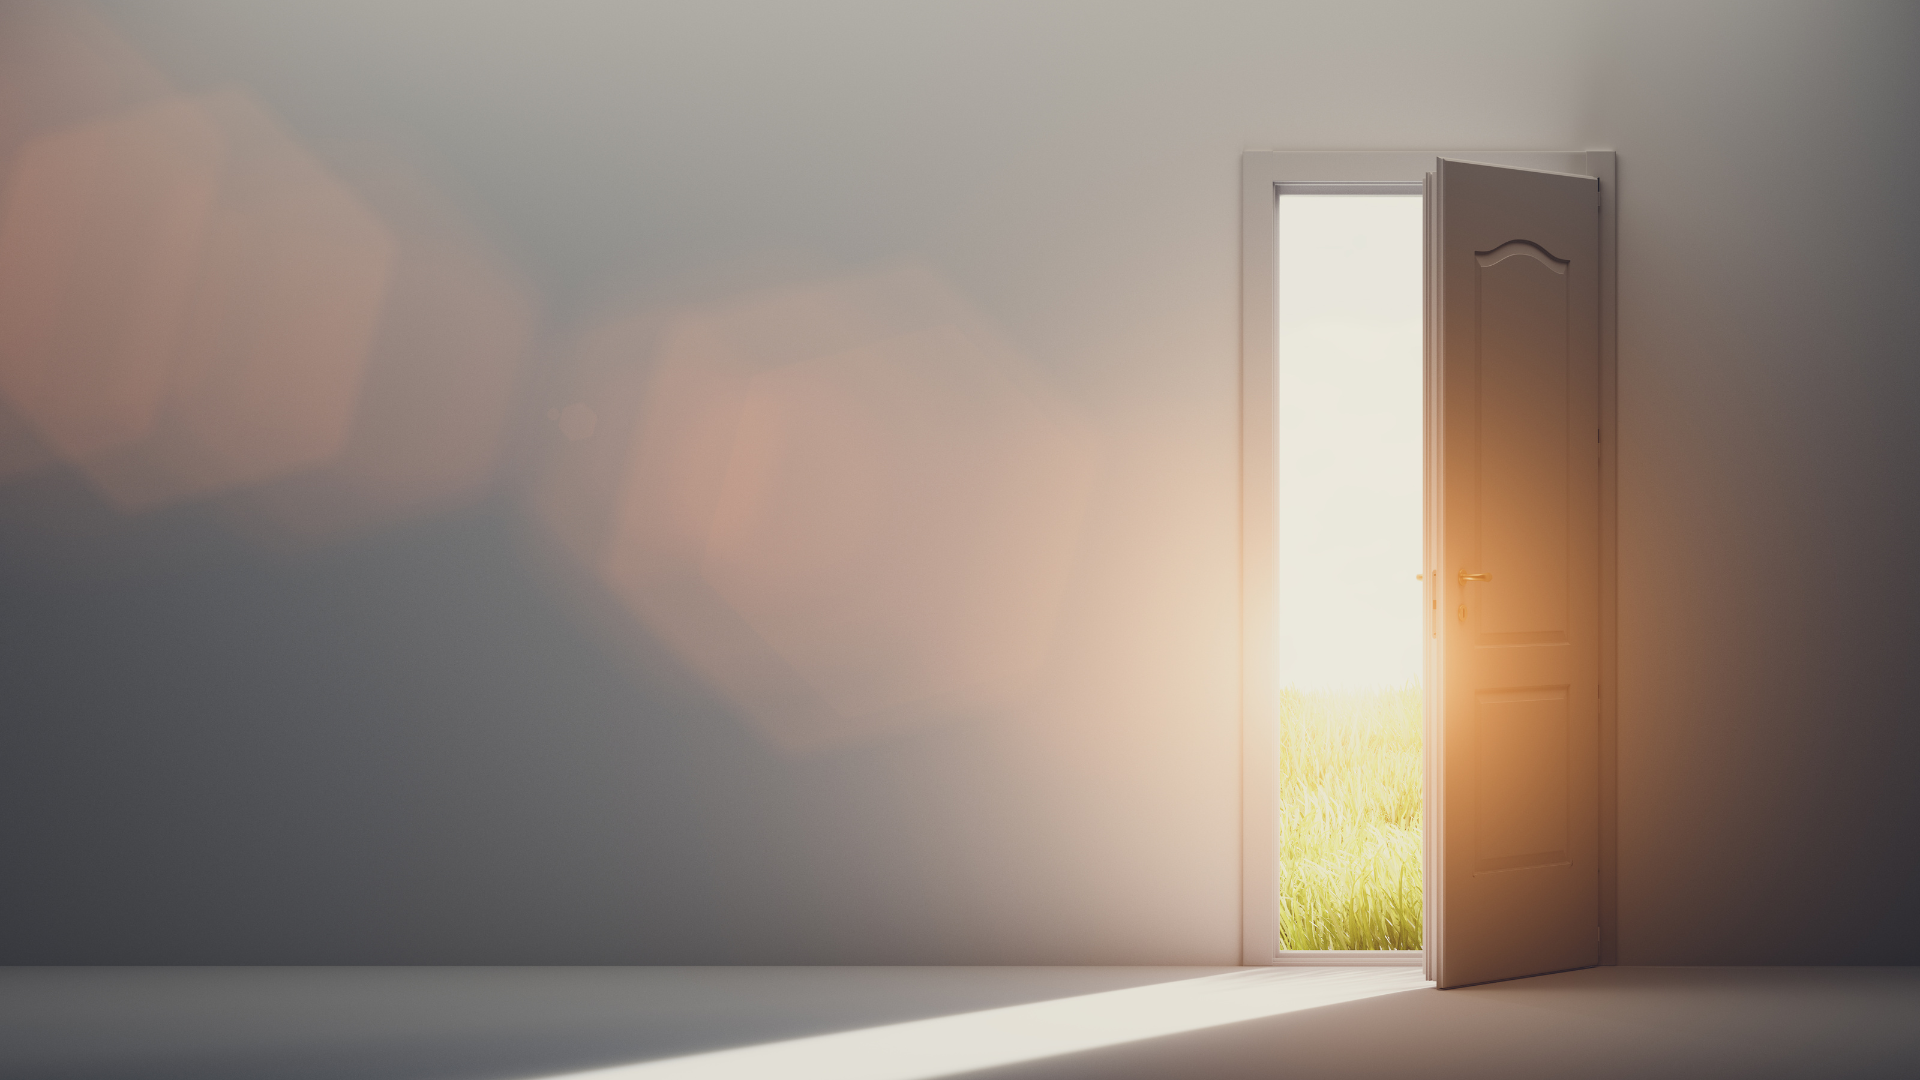 A door in an empty room opens outward to a grassy plain.